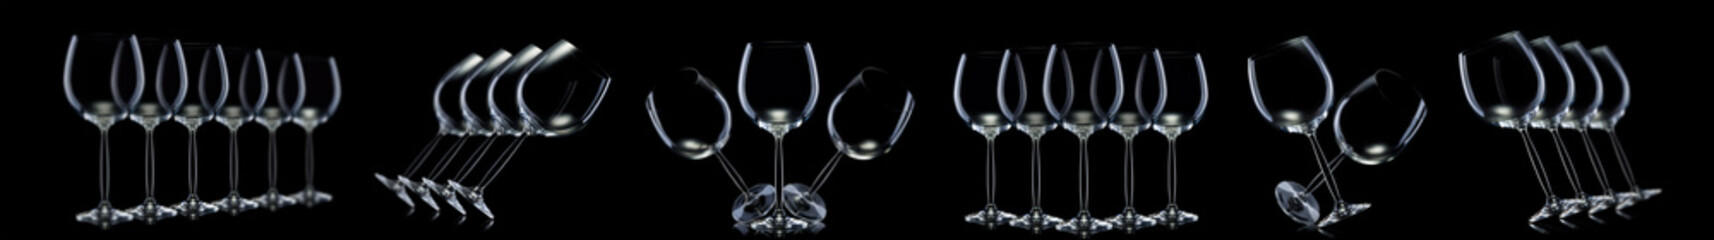 Set of empty glasses for red wine isolated on black background.